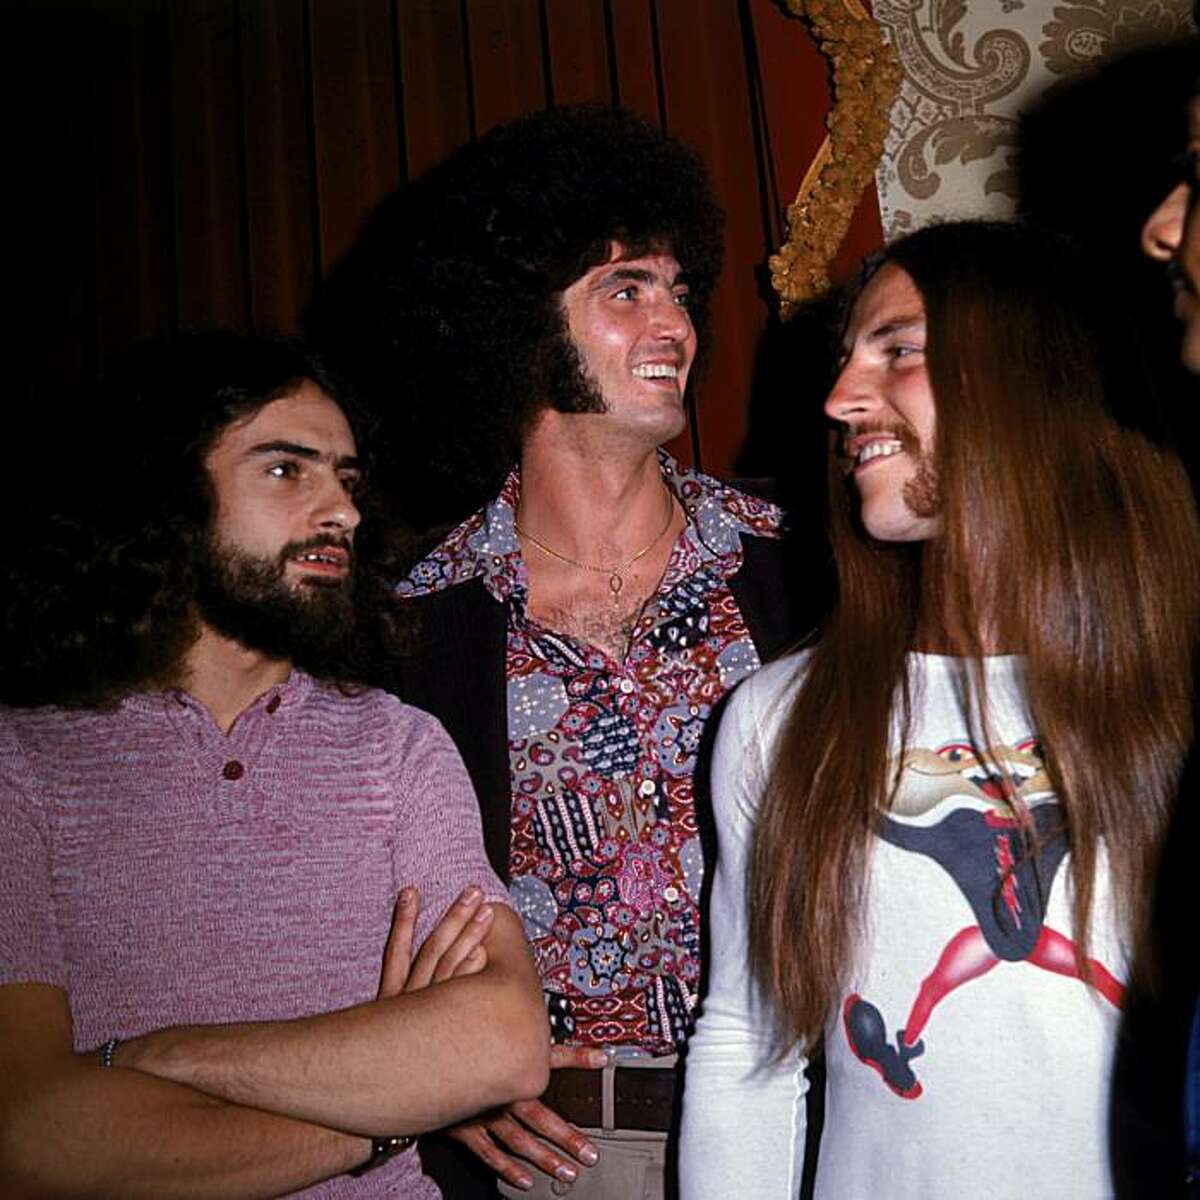 Let's take a look back at some of the musicians who made rock, pop and folk a powerful force in the 1970s. We've tried to keep the captions as they appeared originally, though some minor editing was necessary...Members of the American rock band Grand Funk Railroad, (Left to right): Mel Schacher, Don Brewer, and Mark Farner, 1970s.